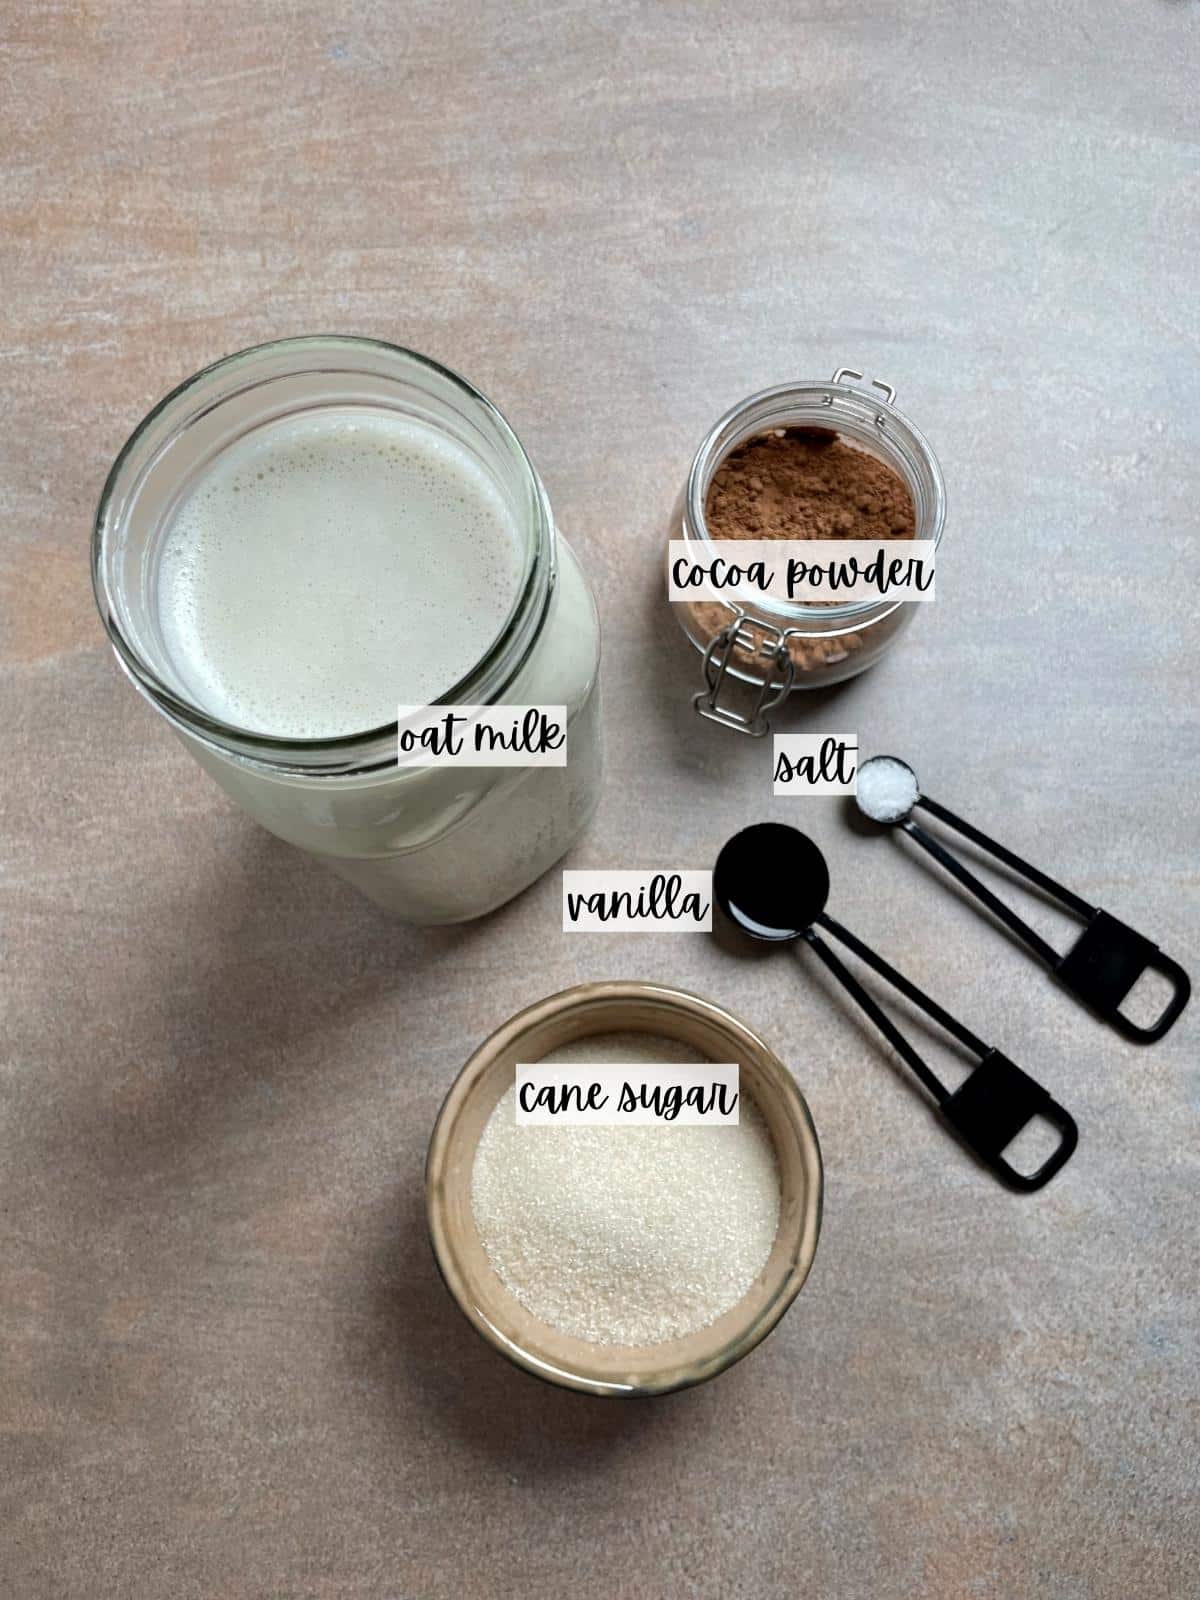 Labeled ingredients for oat milk hot chocolate.